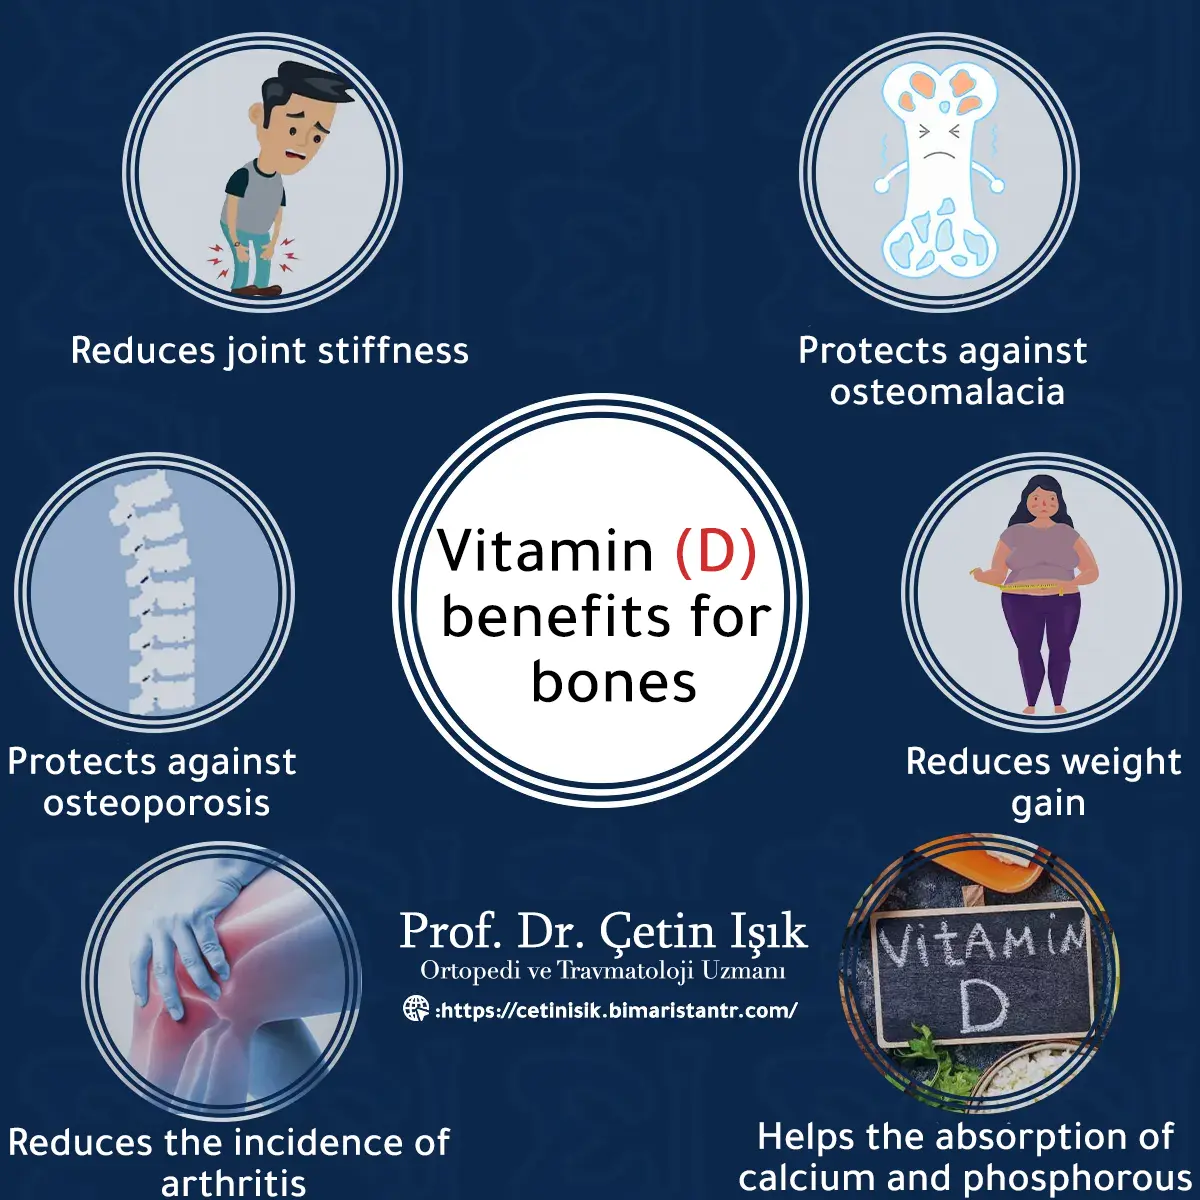 The benefits of vitamin D for bones are to prevent the occurrence of bone and joint diseases and reduce weight gain